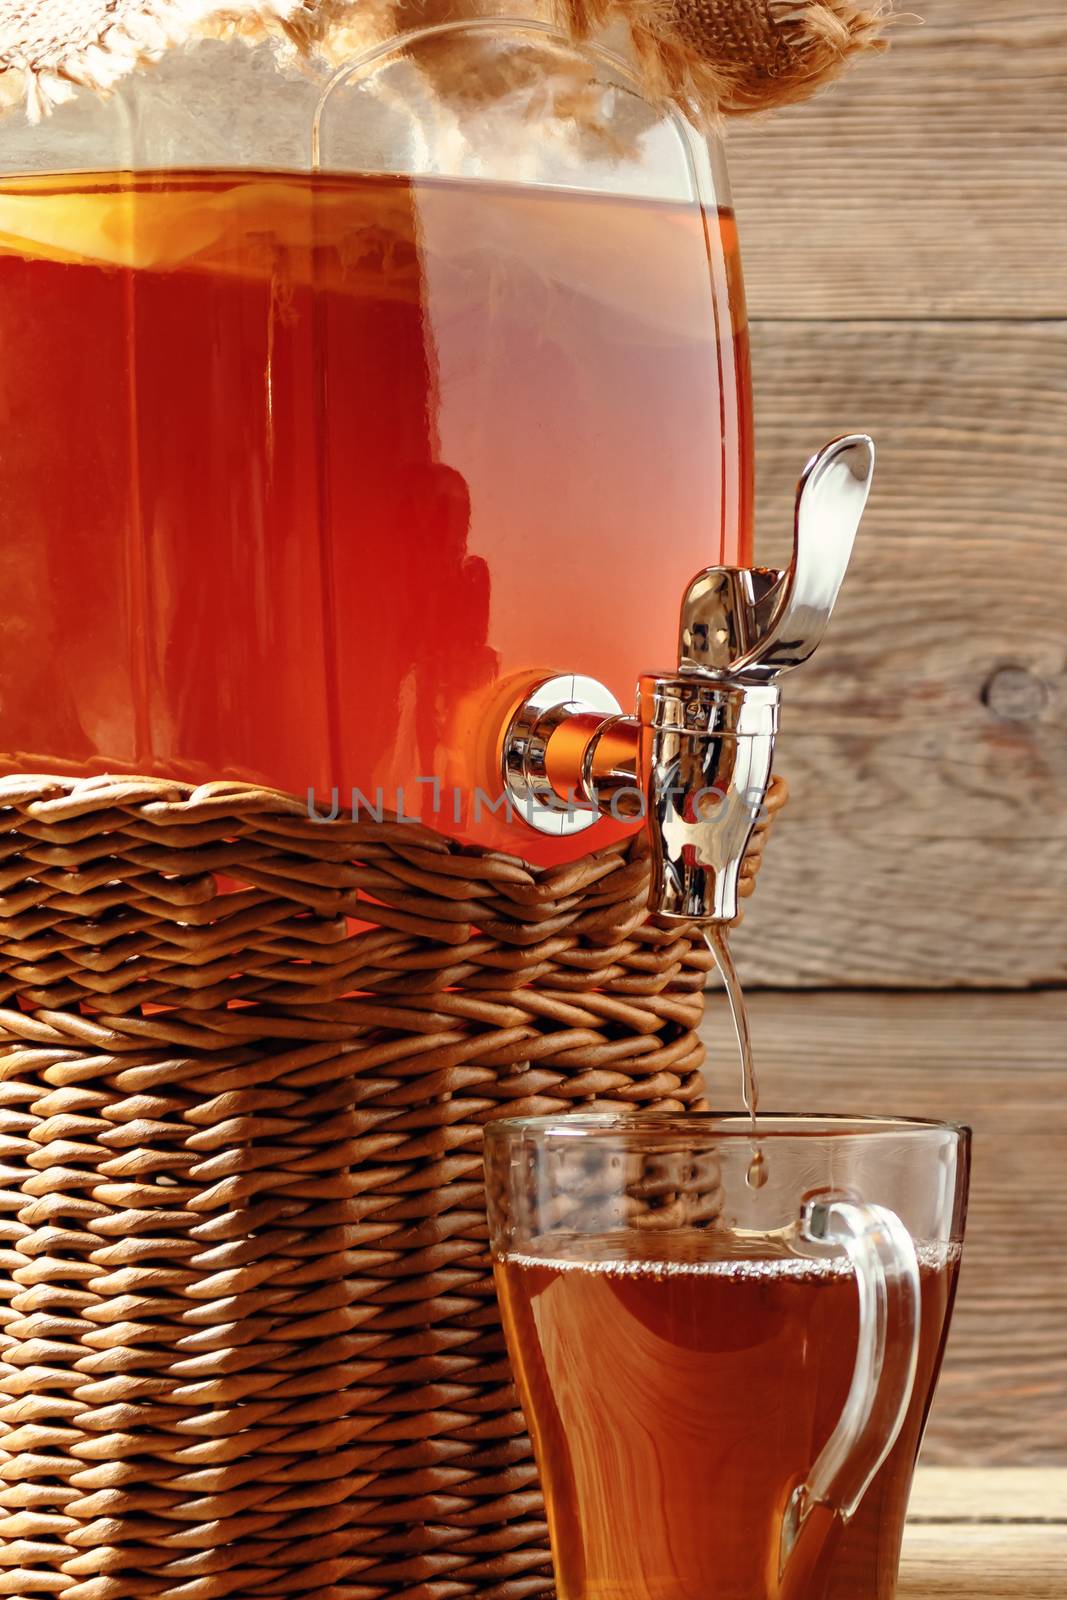 Fresh homemade Kombucha fermented tea drink in jar with faucet and in cup on wooden background, vertical image